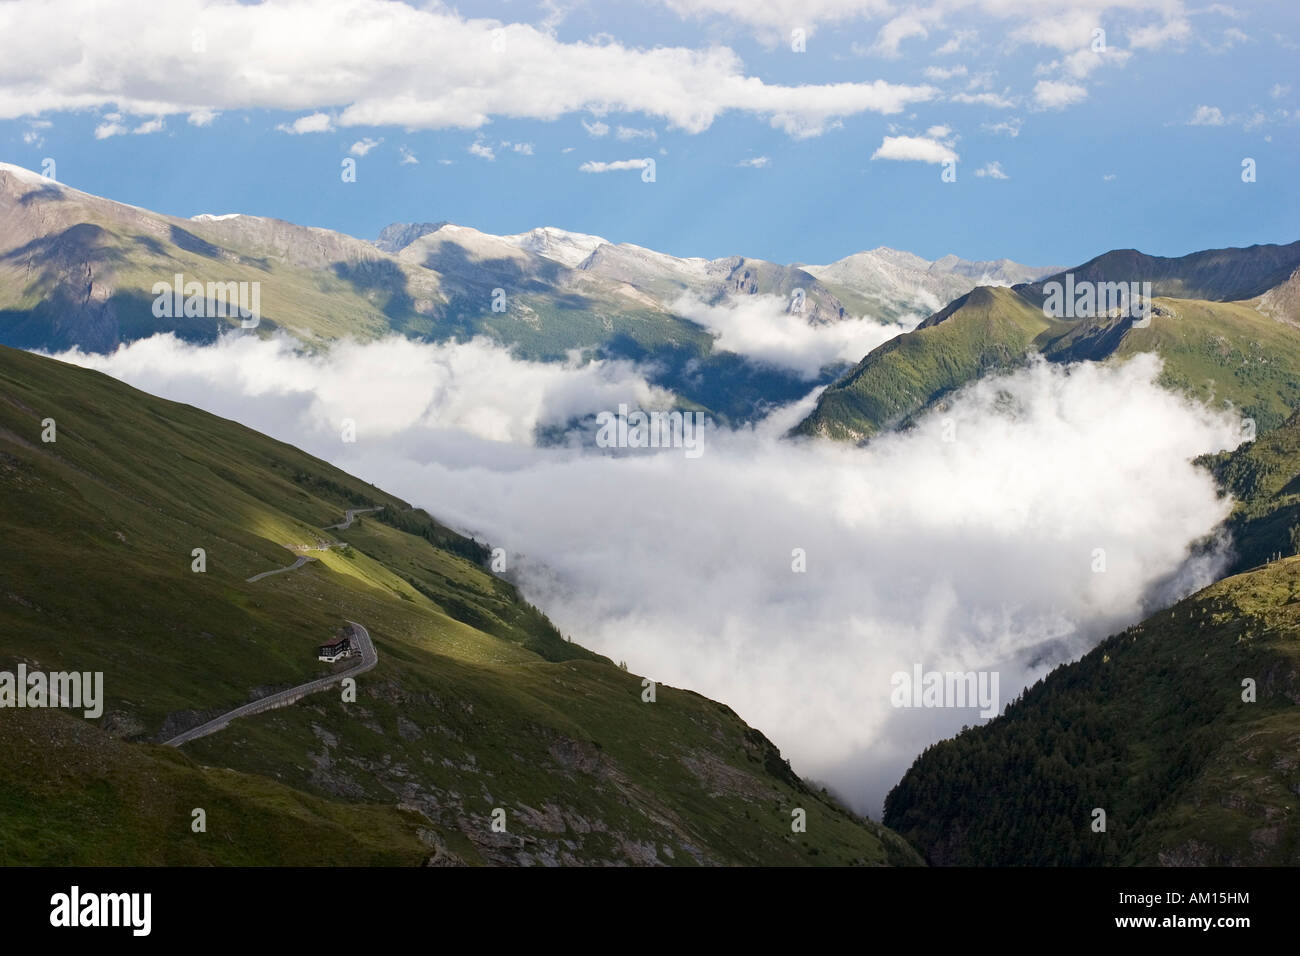 Clouds in a valley, Grossglockner High Alpine Road, National Park Hohe Tauern, Austria Stock Photo